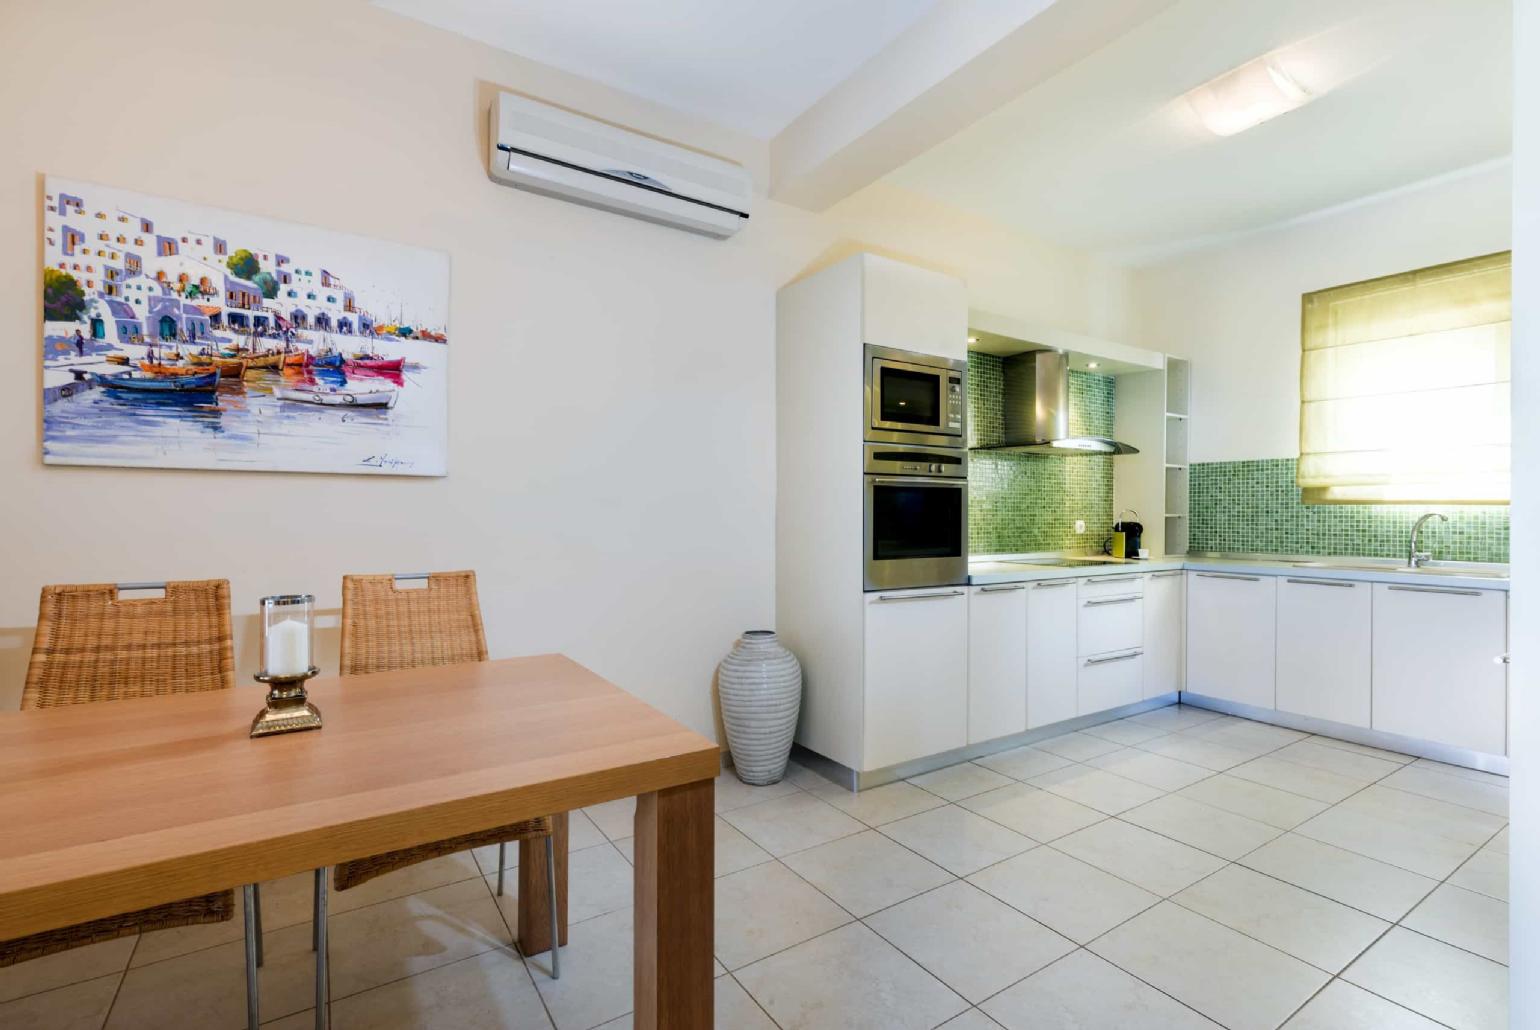 Equipped kitchen with dinning table and A/C